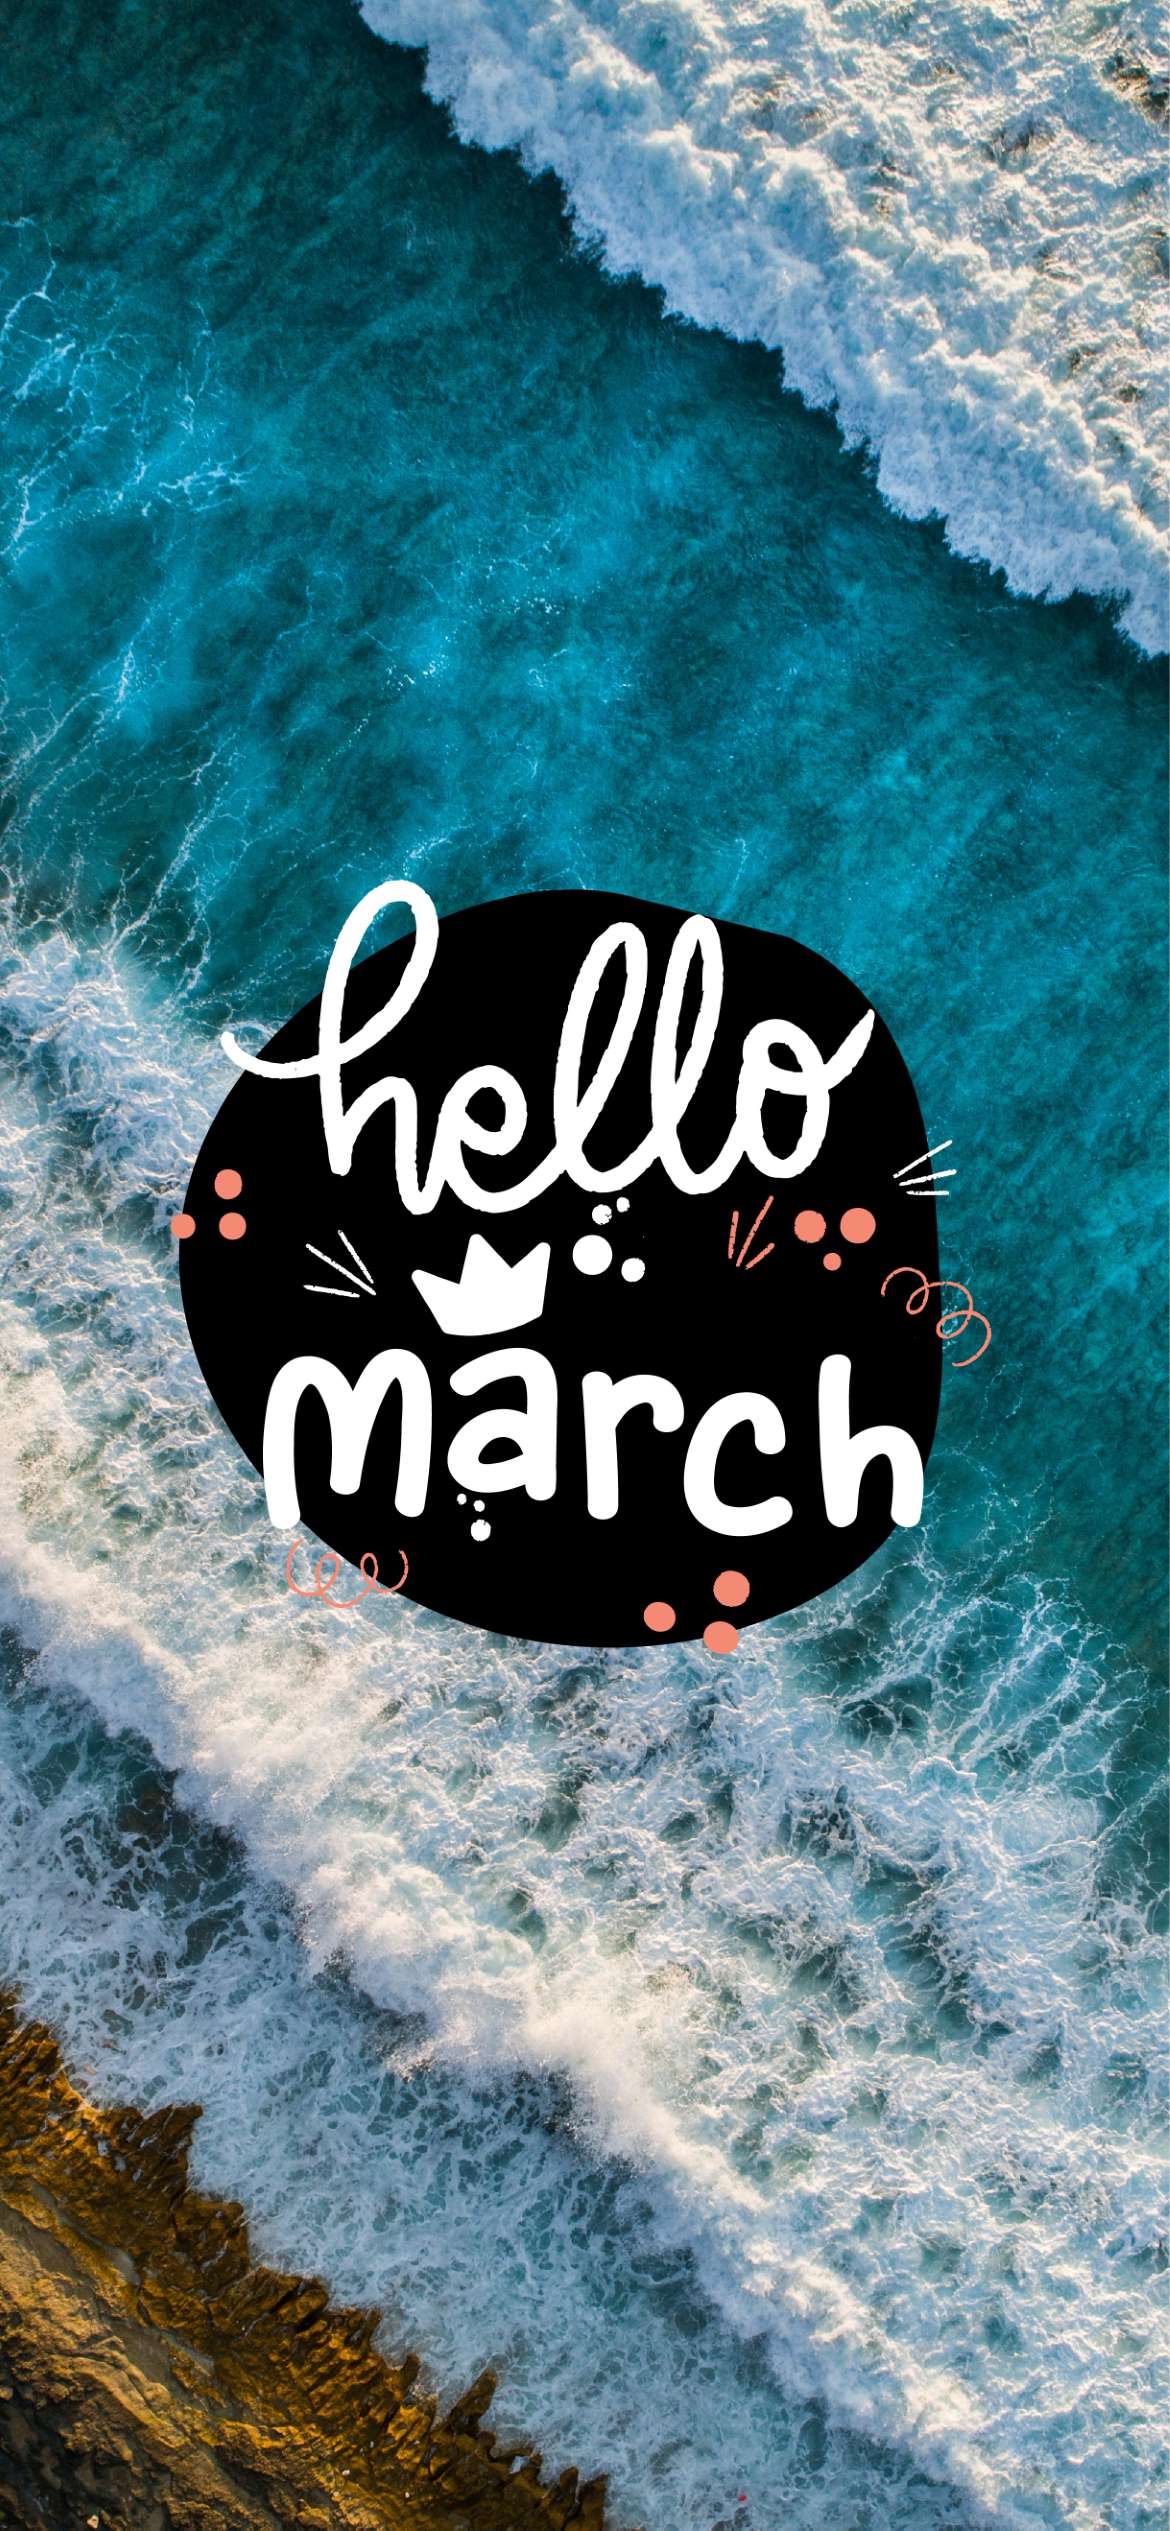 A black and white image of the ocean with hello march written on it - March